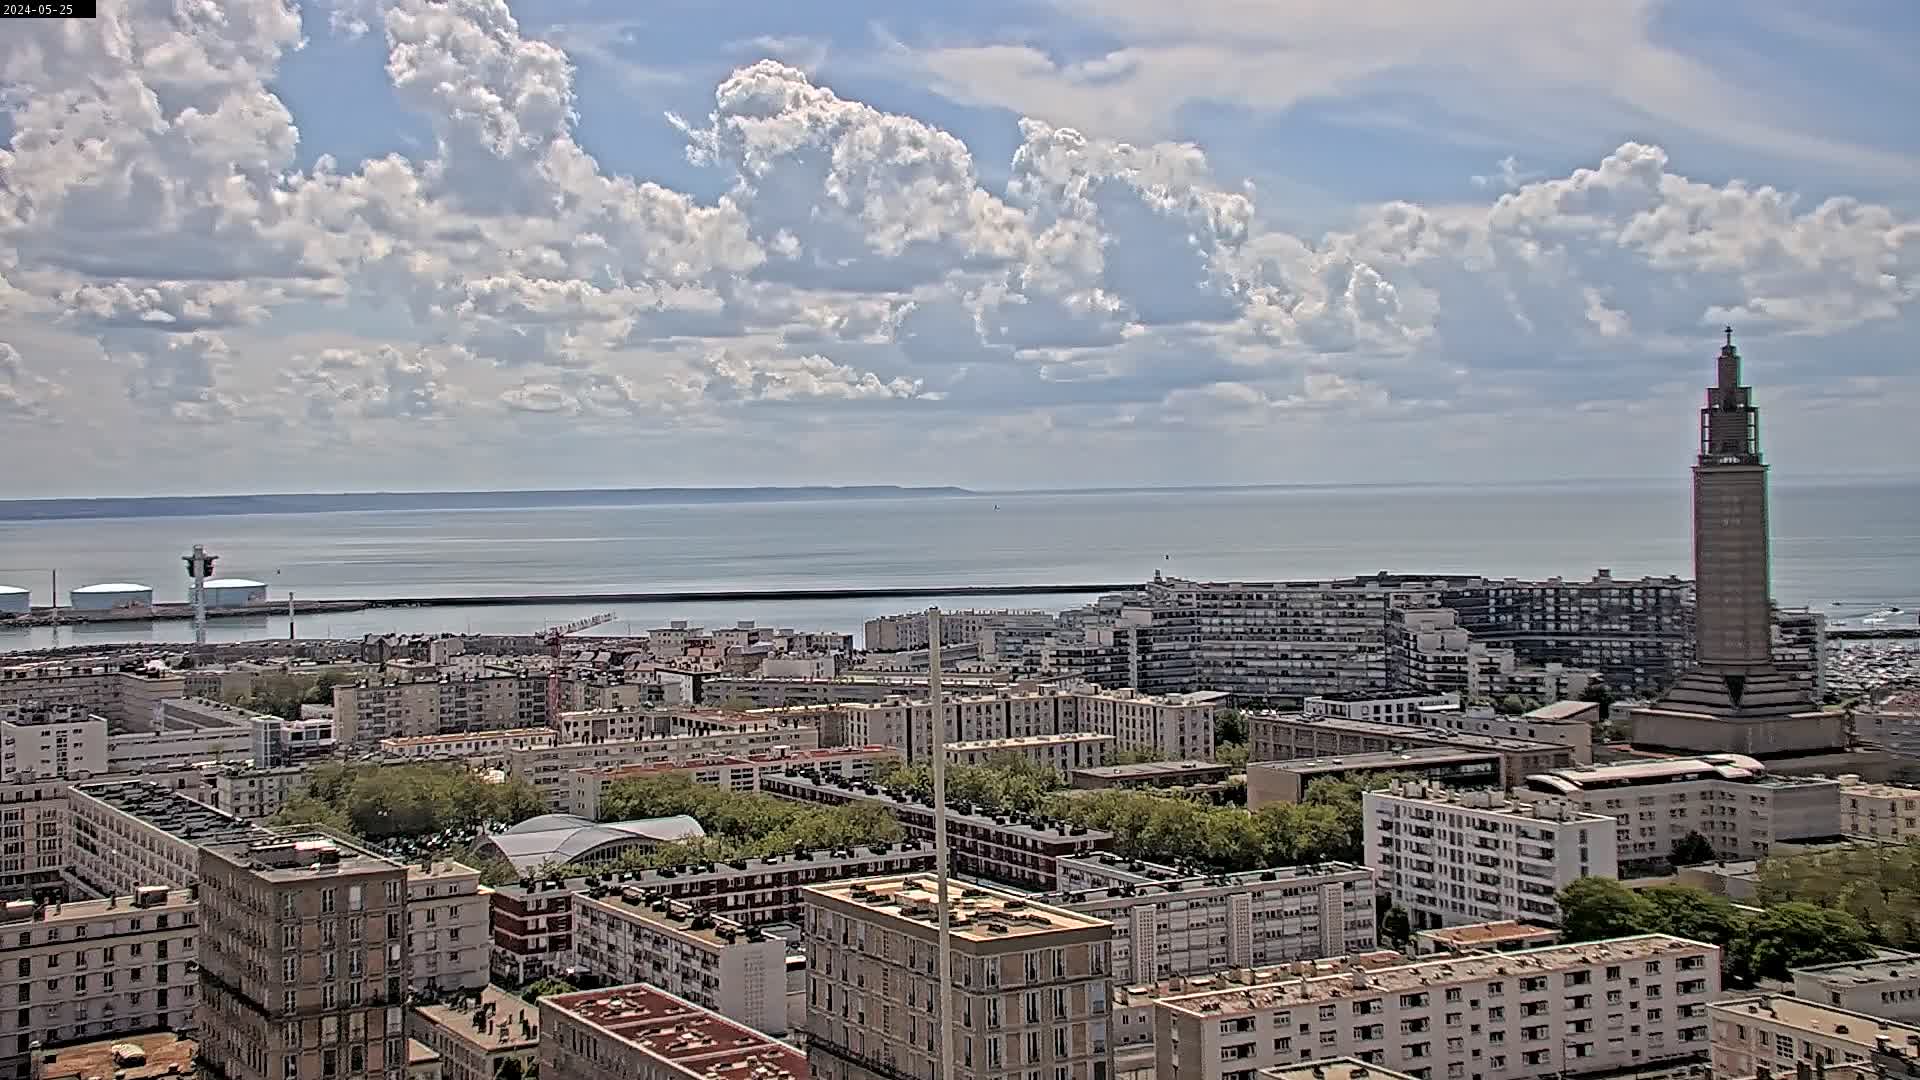 Le Havre Gio. 15:10